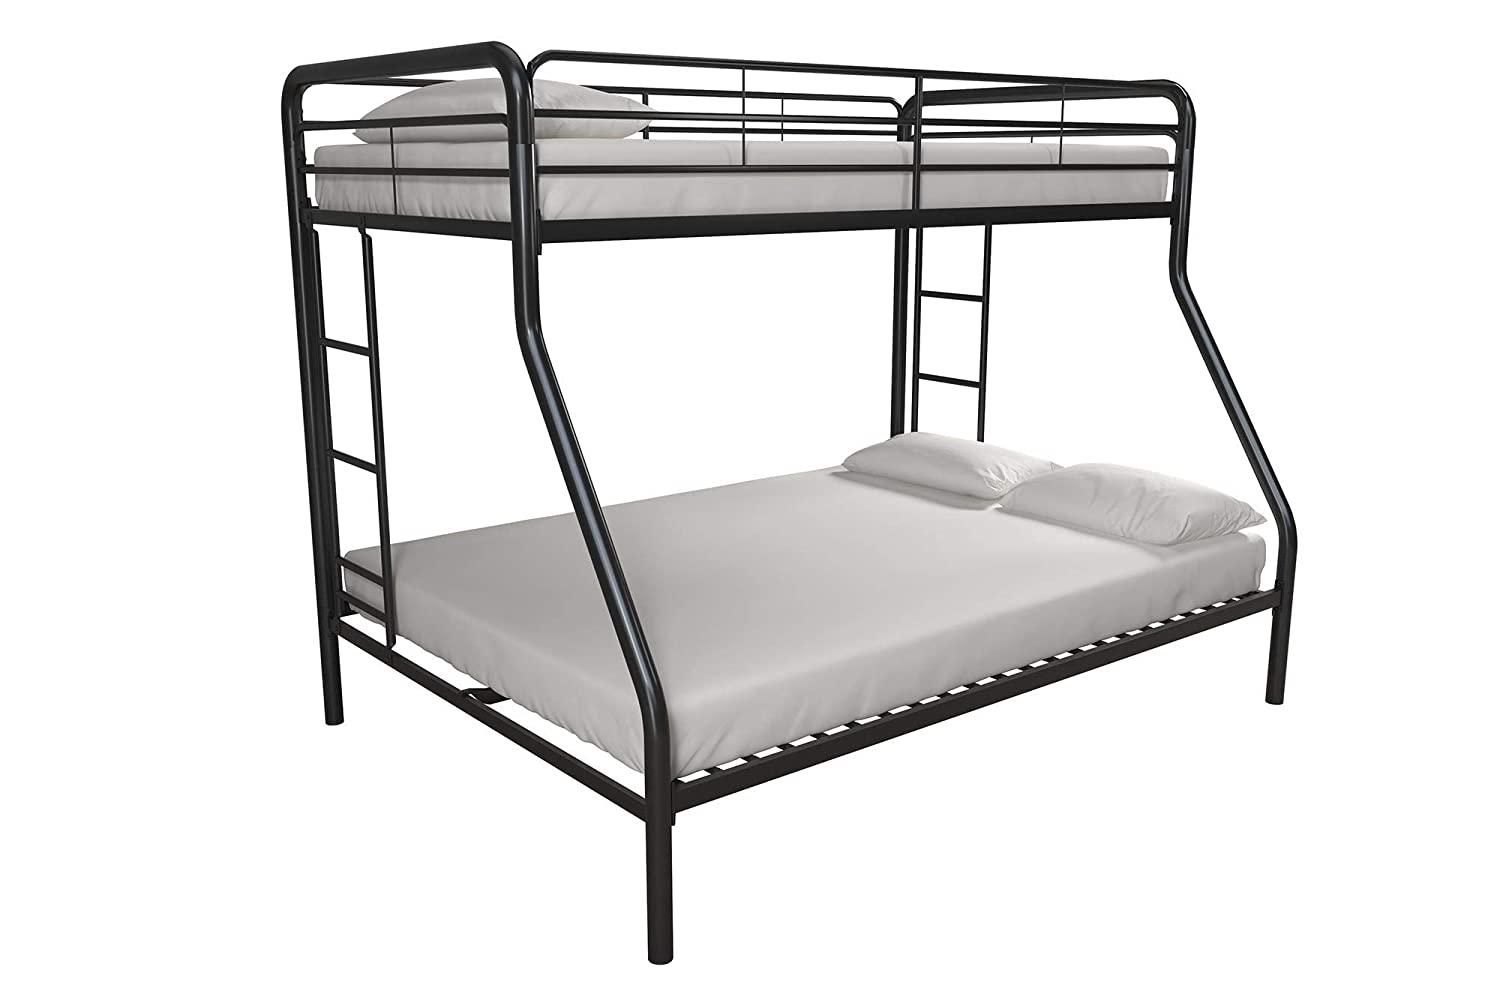 7 Best Kids Bunk Beds Under $200 2022 - Buying Guide 5